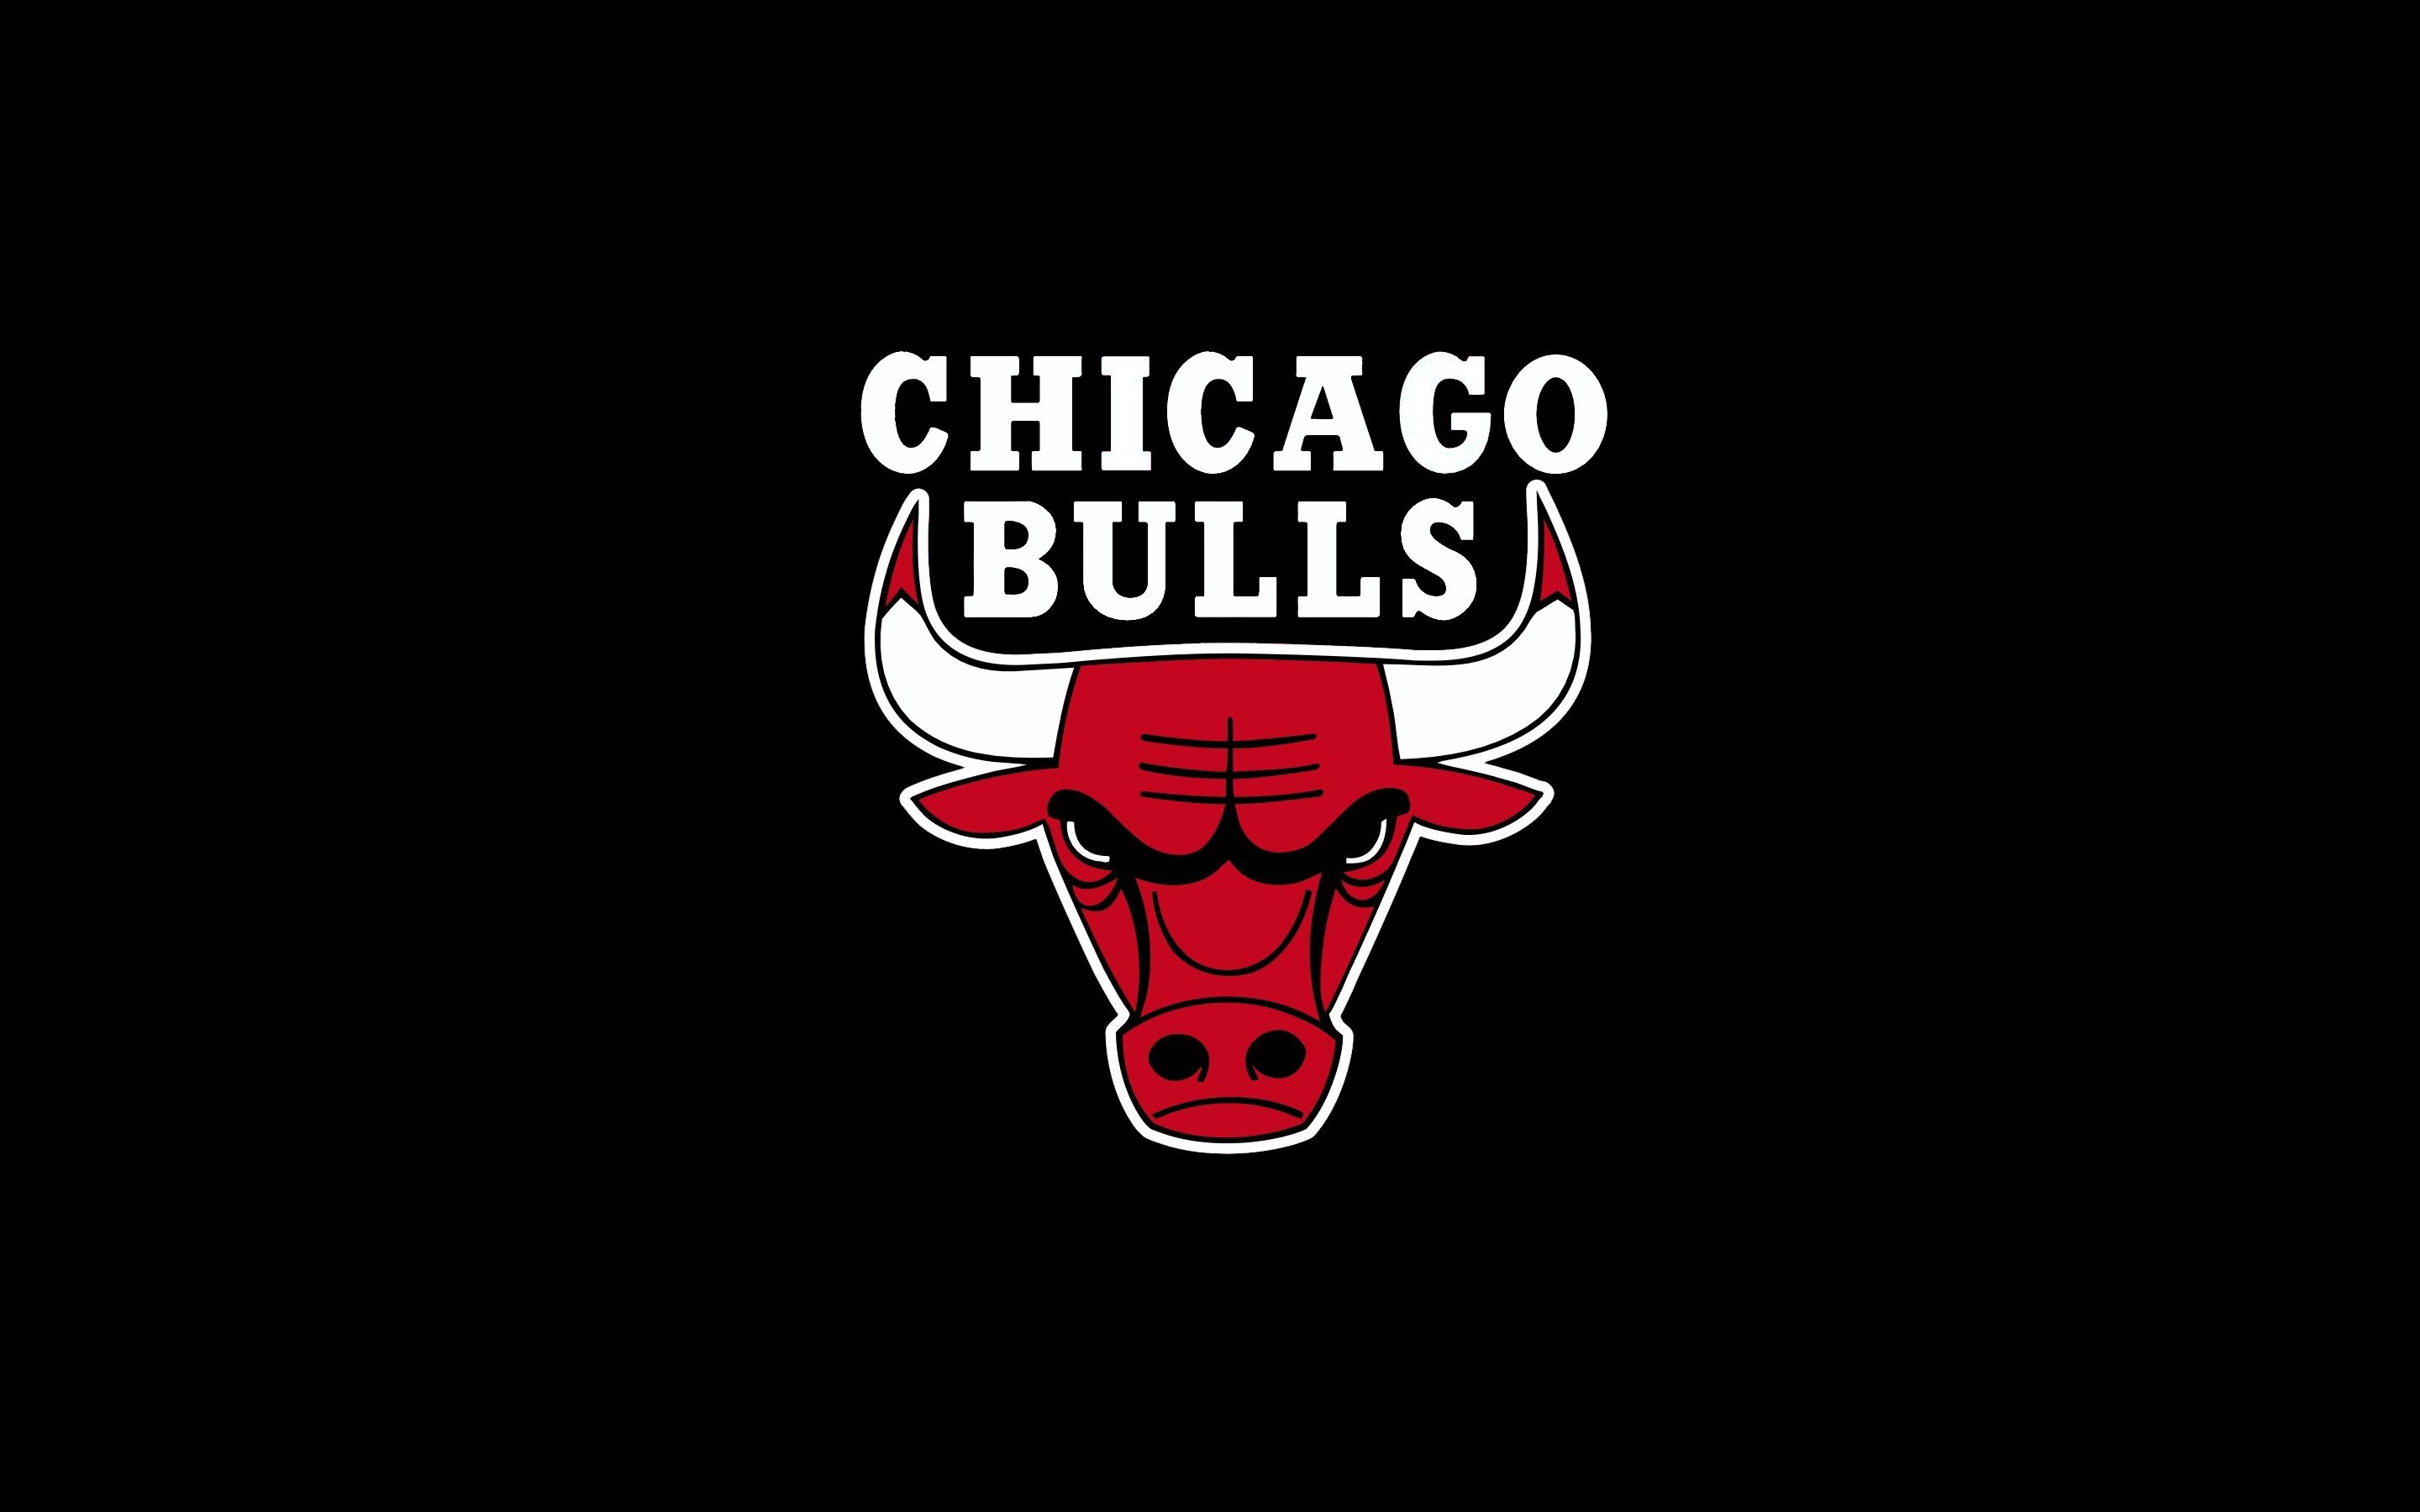 Bulls 4K wallpaper for your desktop or mobile screen free and easy to download